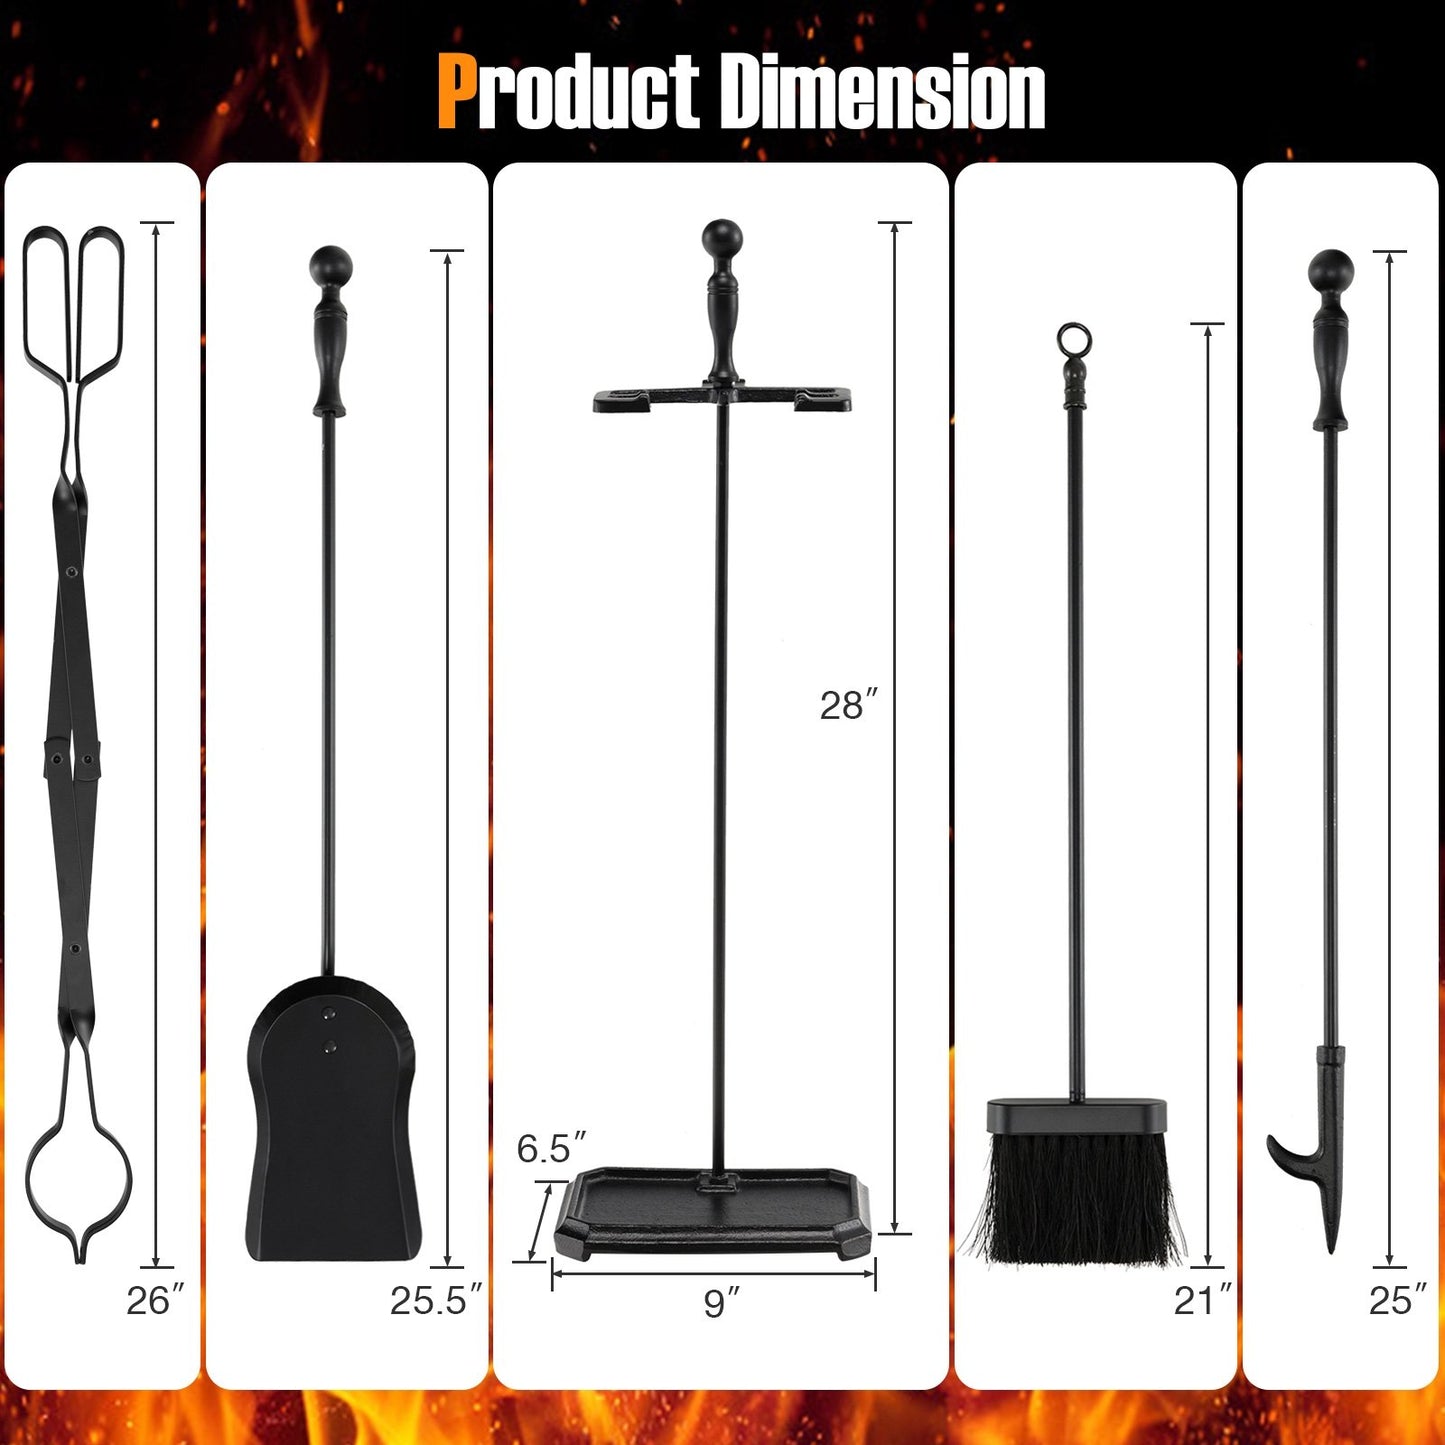 5-Piece Fireplace Tool Set with Tong Brush Shovel Poker Stand, Black